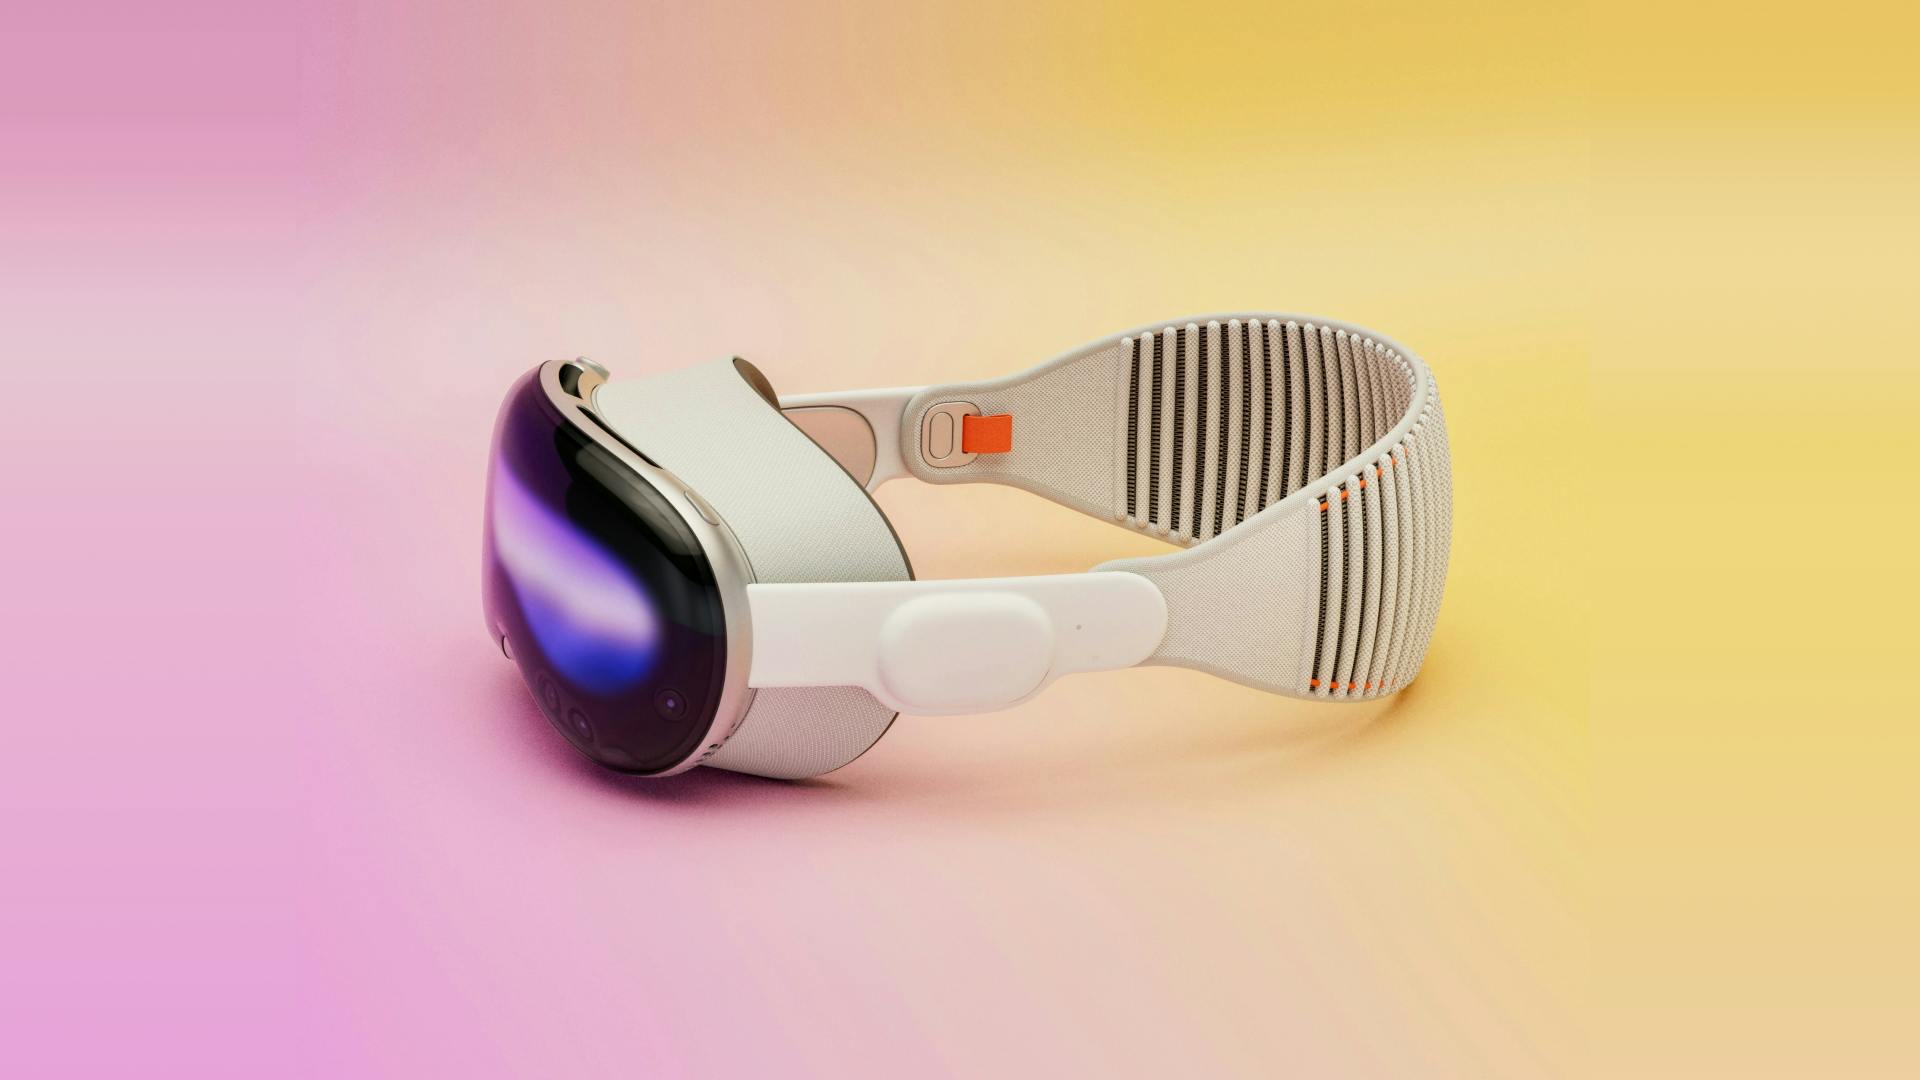 This is a 3D illustration of a VR headset. It looks like it's turned on as we can see colors on the screen. The background is a pastel gradient color from pink to yellow.